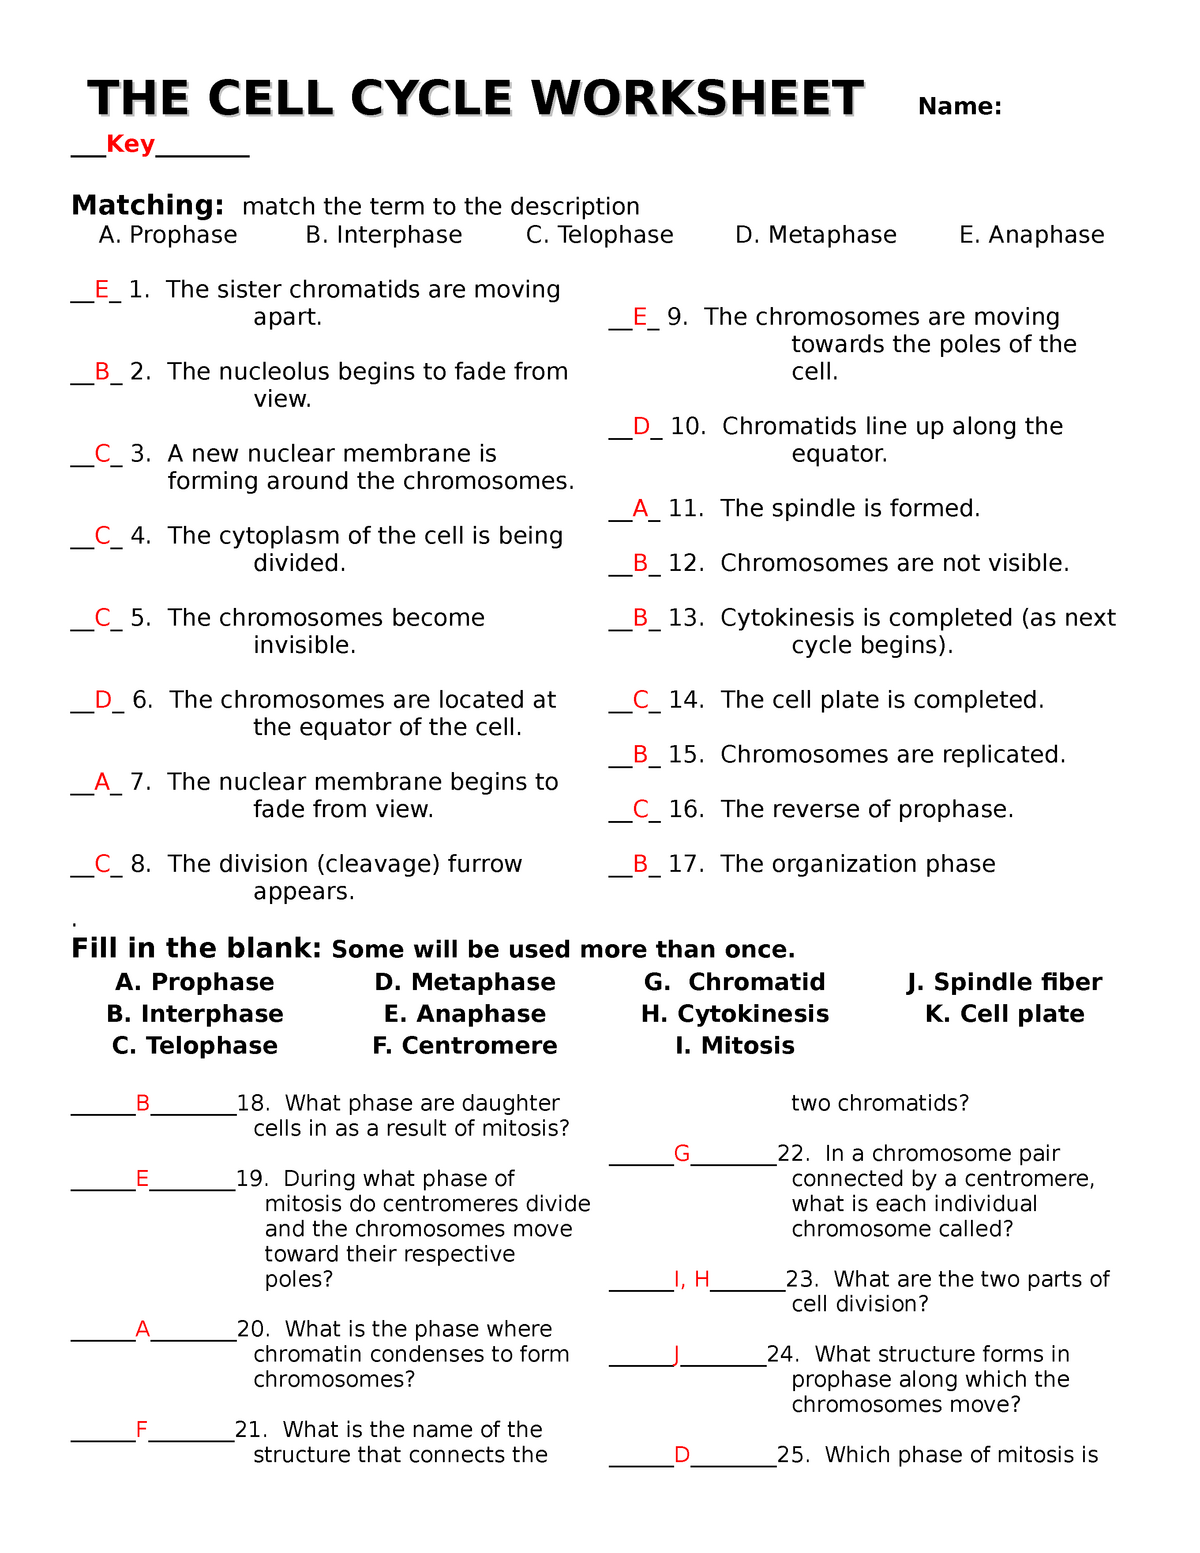 The-cell-cycle-worksheet with answers - BIOG-10 - Explorations in Throughout Cell Cycle Worksheet Answer Key